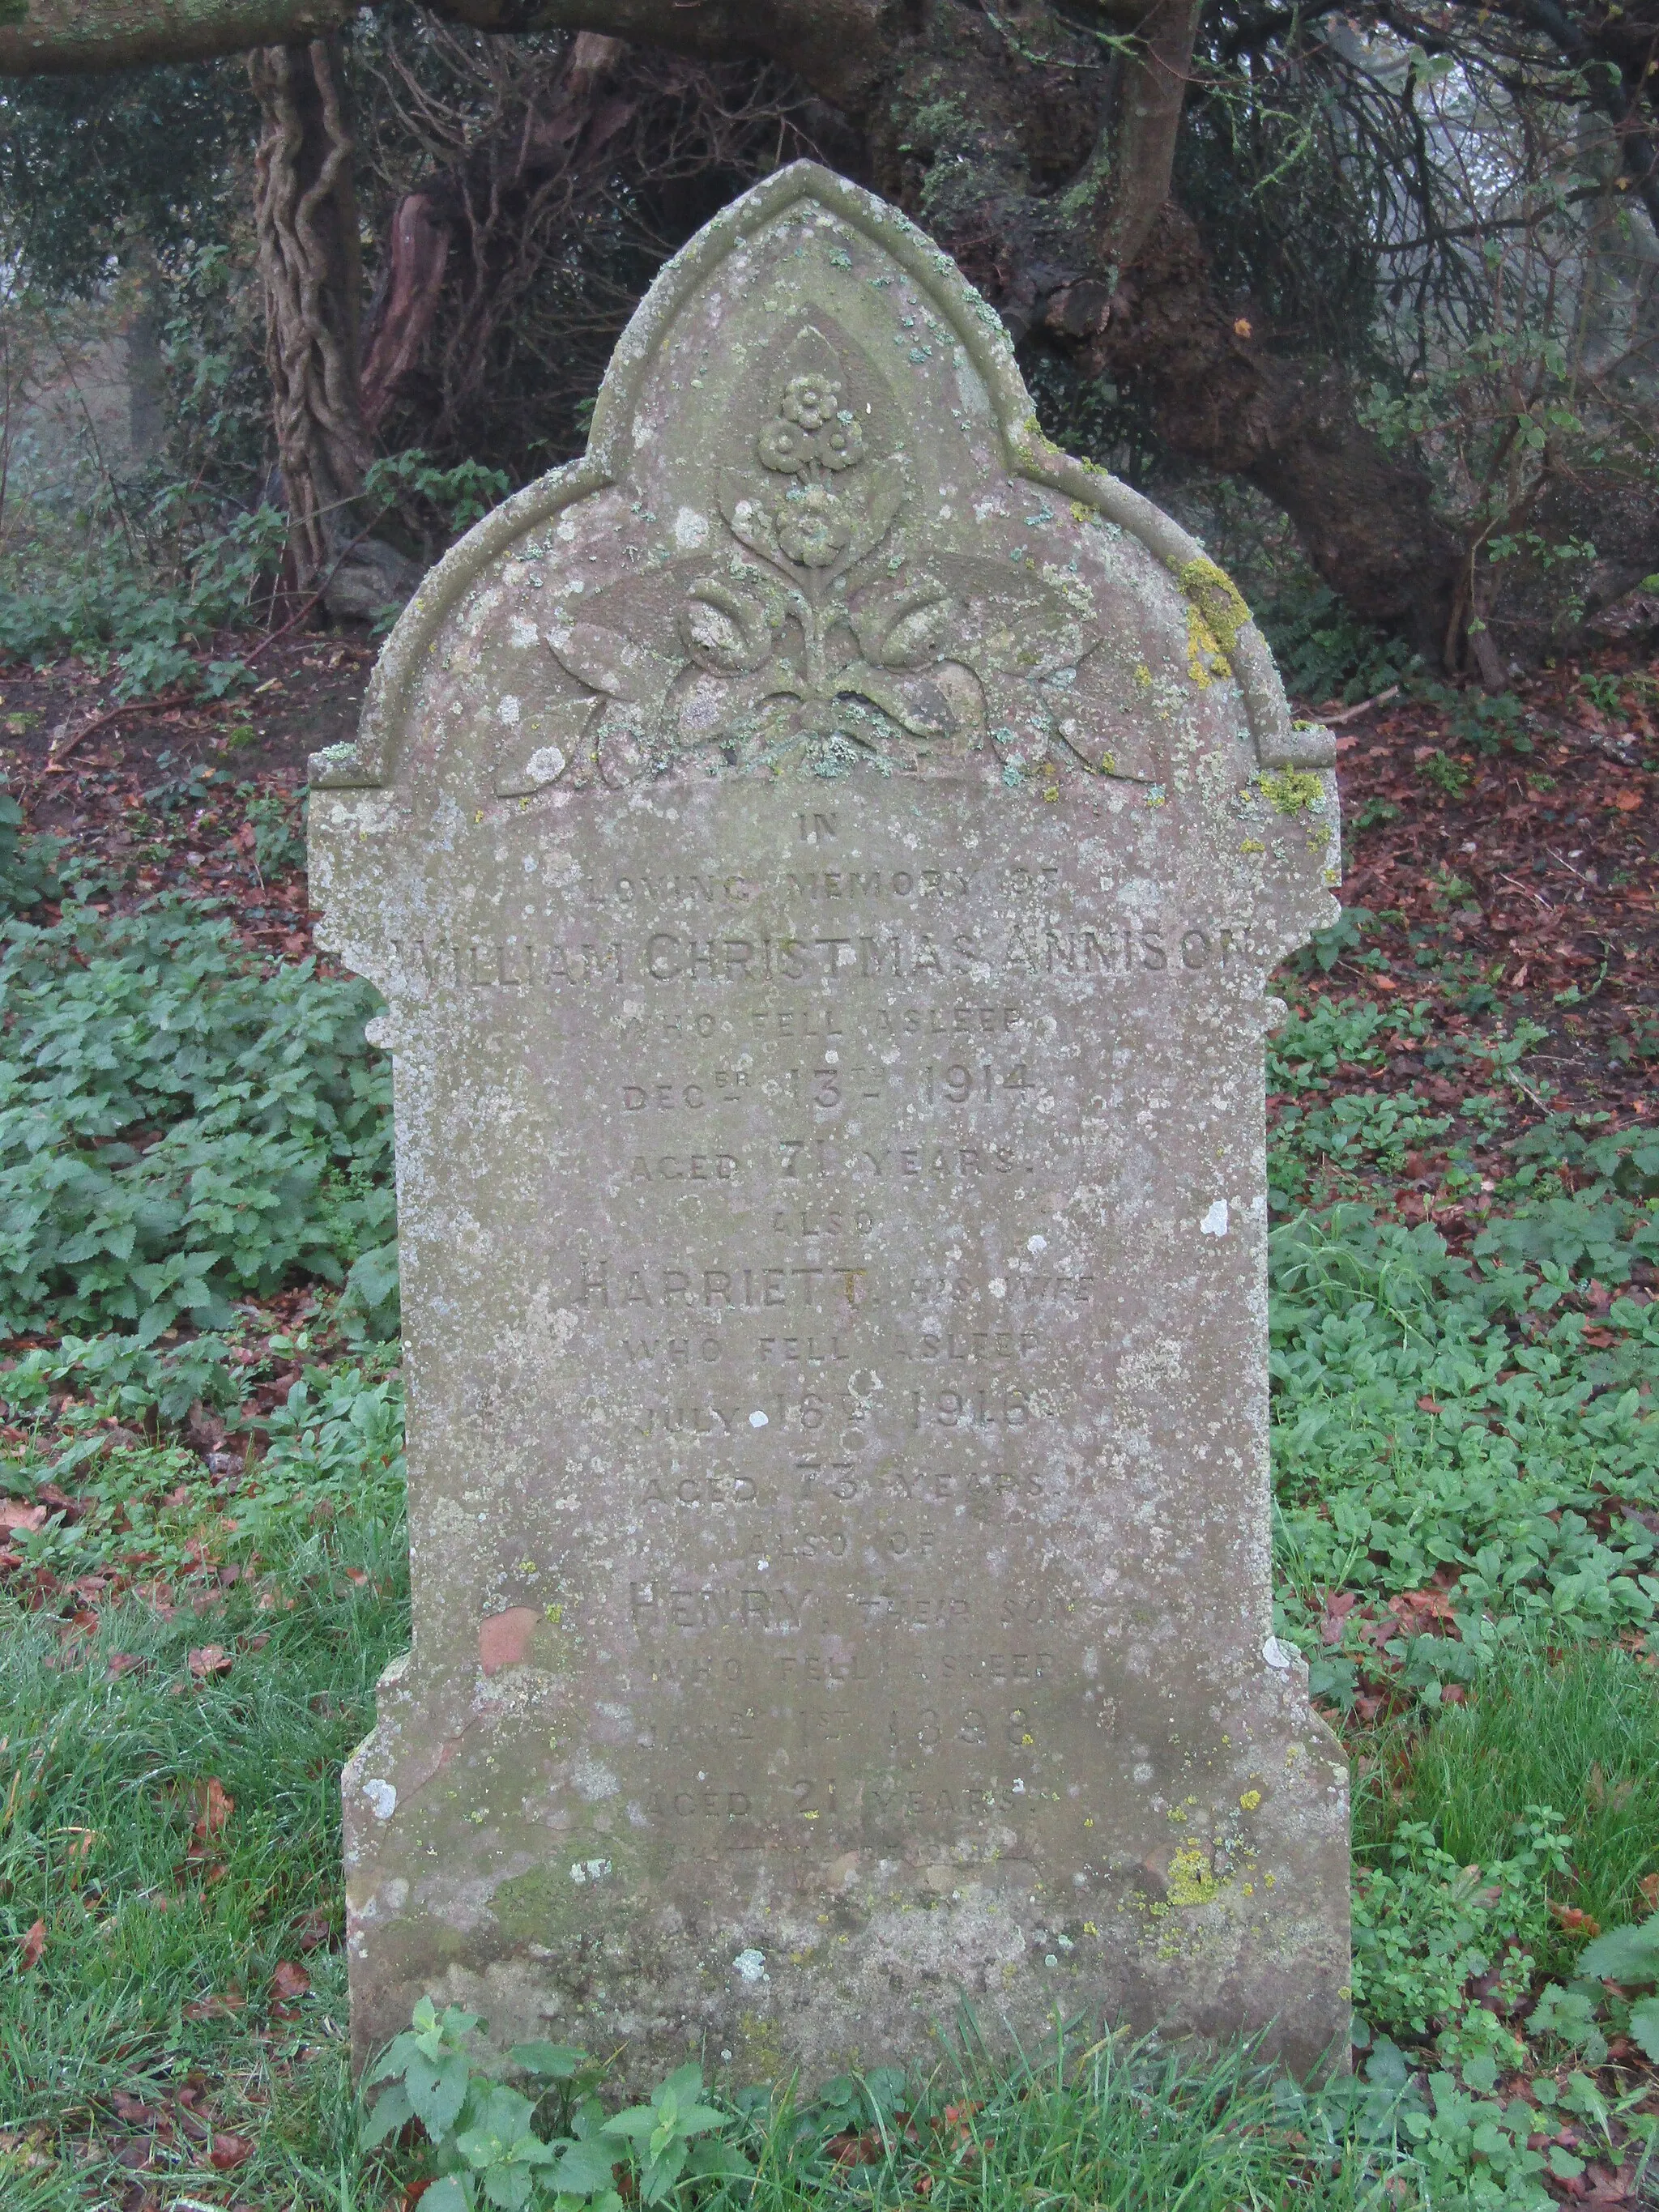 Photo showing: The gravestone of William Christmas Annison in the churchyard of Saint Peters church which is located in the village of North Barningham, Norfolk, England. William Christmas Annison died on the 13 December 1914 aged 71,